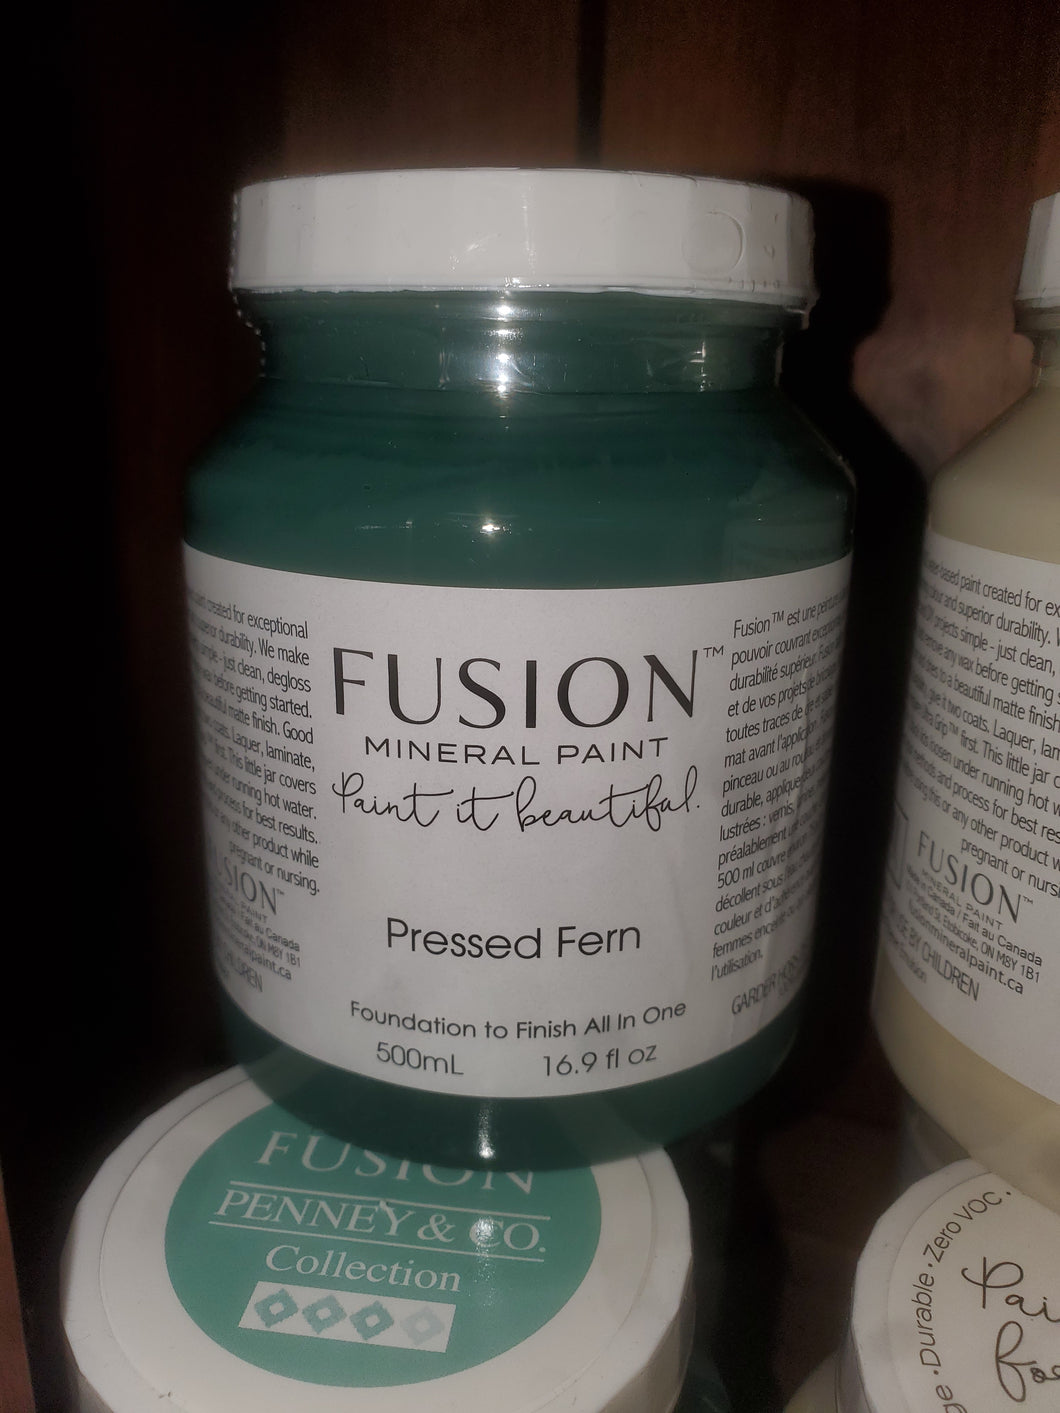 Fusion Mineral Paint in Pressed Fern